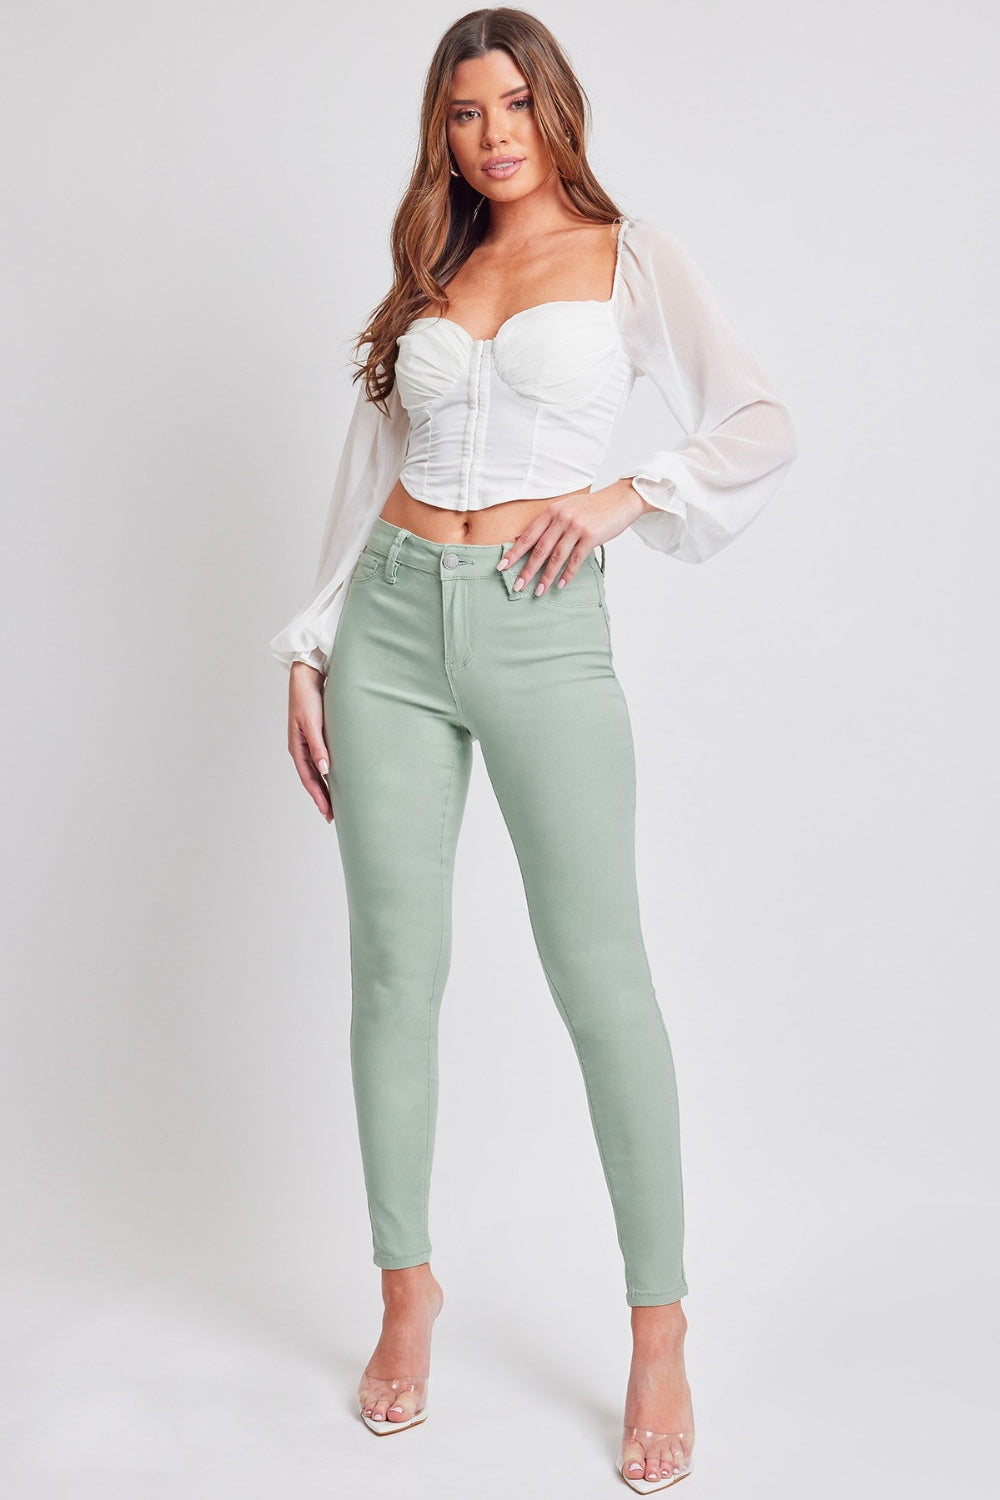 YMI Jeanswear Hyperstretch Mid-Rise Skinny Jeans-Pants-Inspired by Justeen-Women's Clothing Boutique in Chicago, Illinois